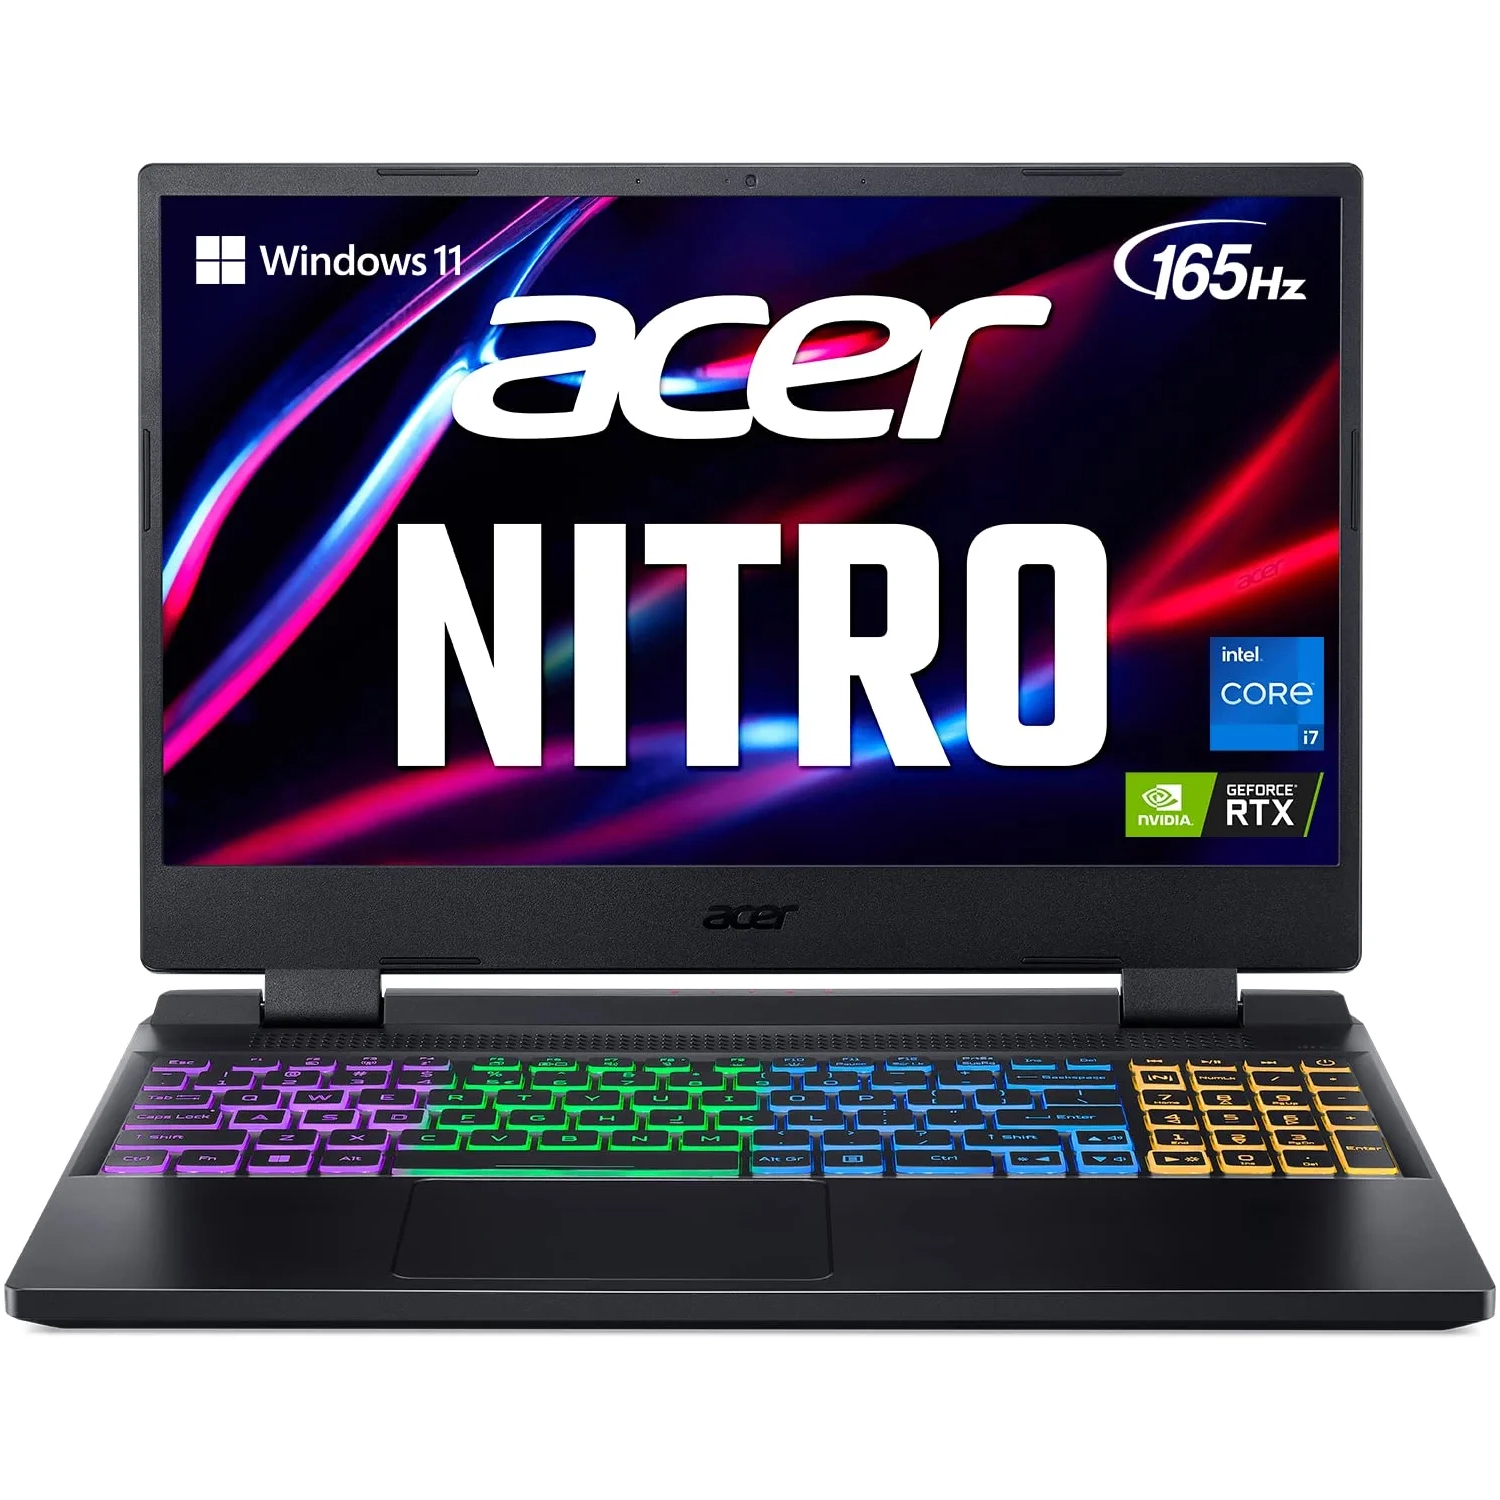 Refurbished (Excellent) Acer 15.6" Nitro 165Hz (Intel i7-12700H/1.0Tb SSD/16GB RAM/Nvidia RTX 3060/Win11) - Manufacturer ReCertified w/ 1 Year Warranty